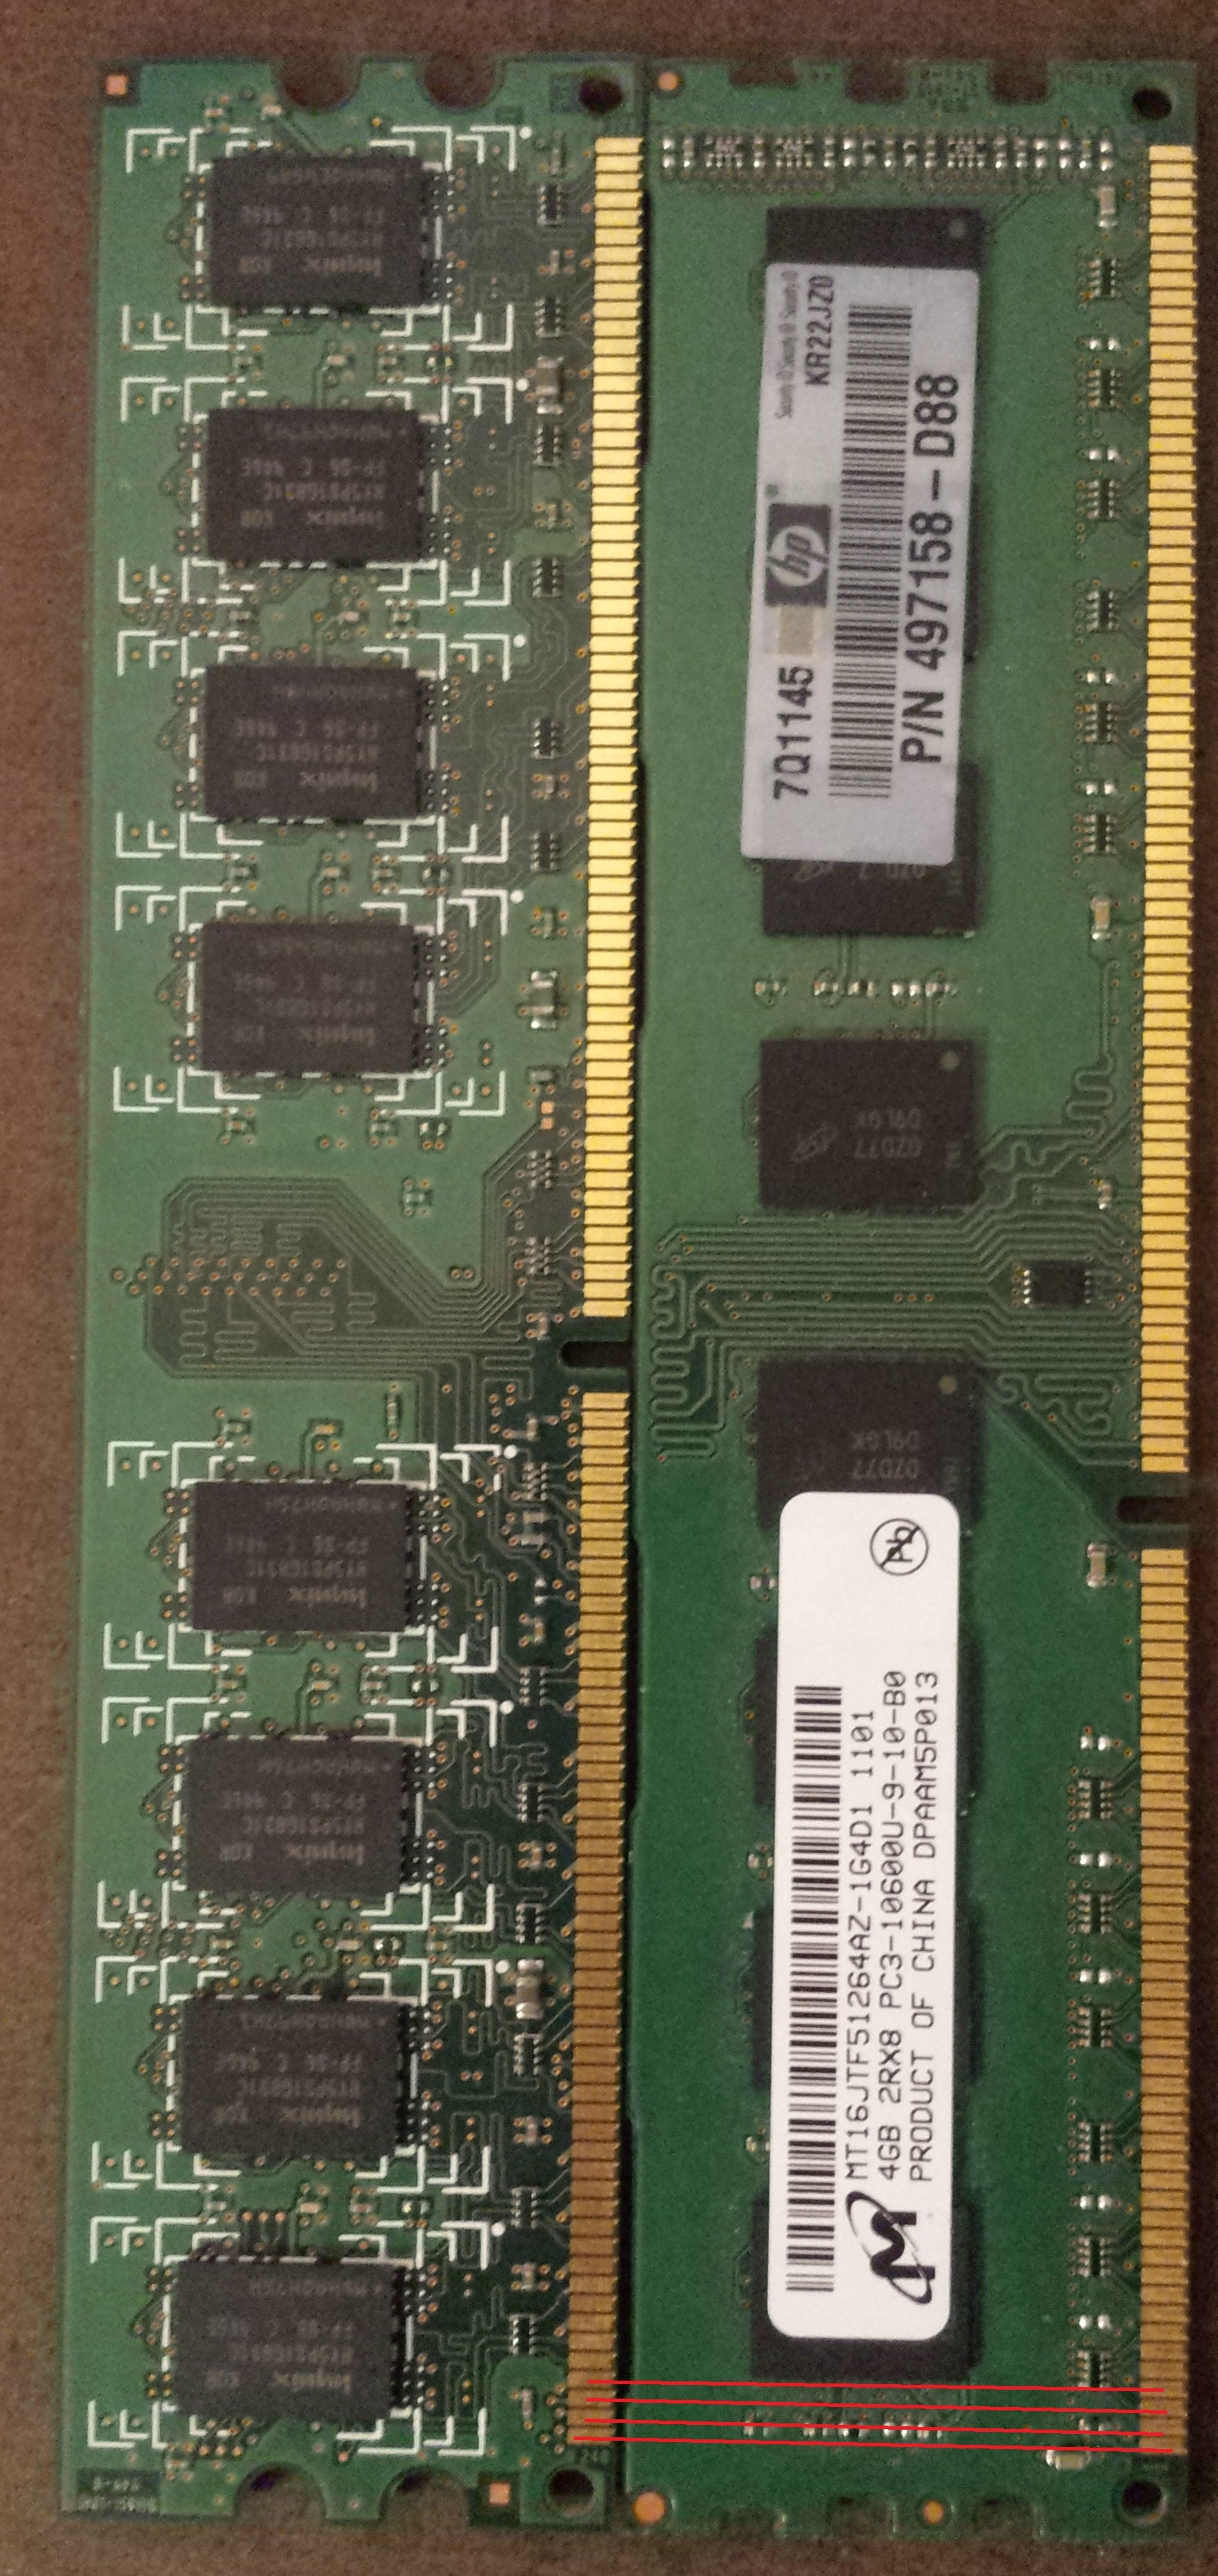 DDR3>DDR3 and DDR2>DDR3 - CPUs, Motherboards, and Memory - Linus Tech Tips